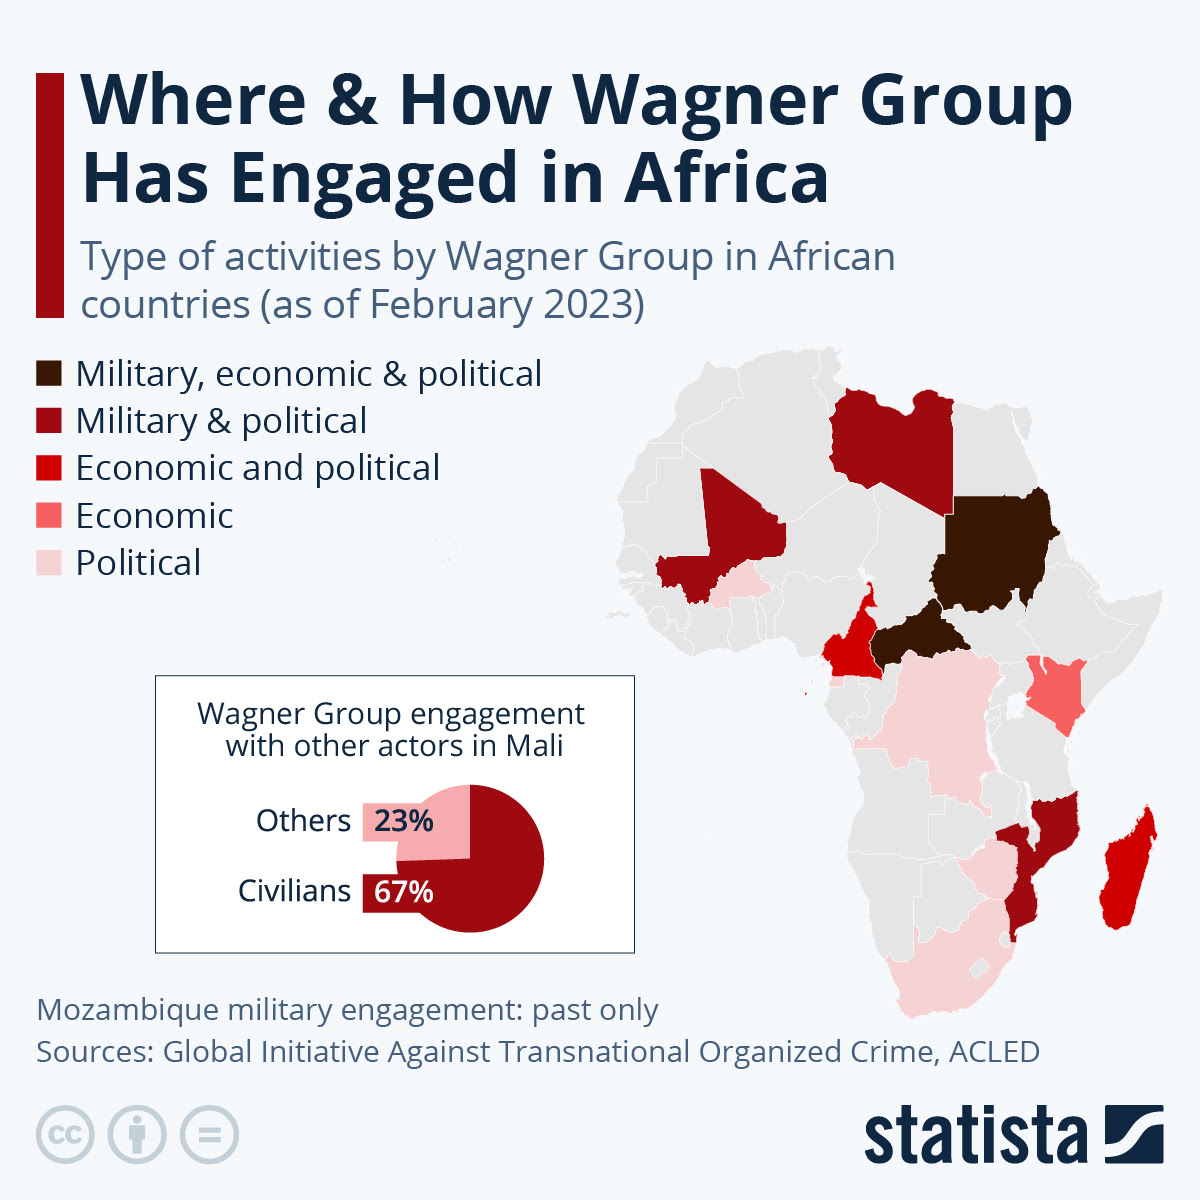 Where & How Wagner Group Has Engaged in Africa